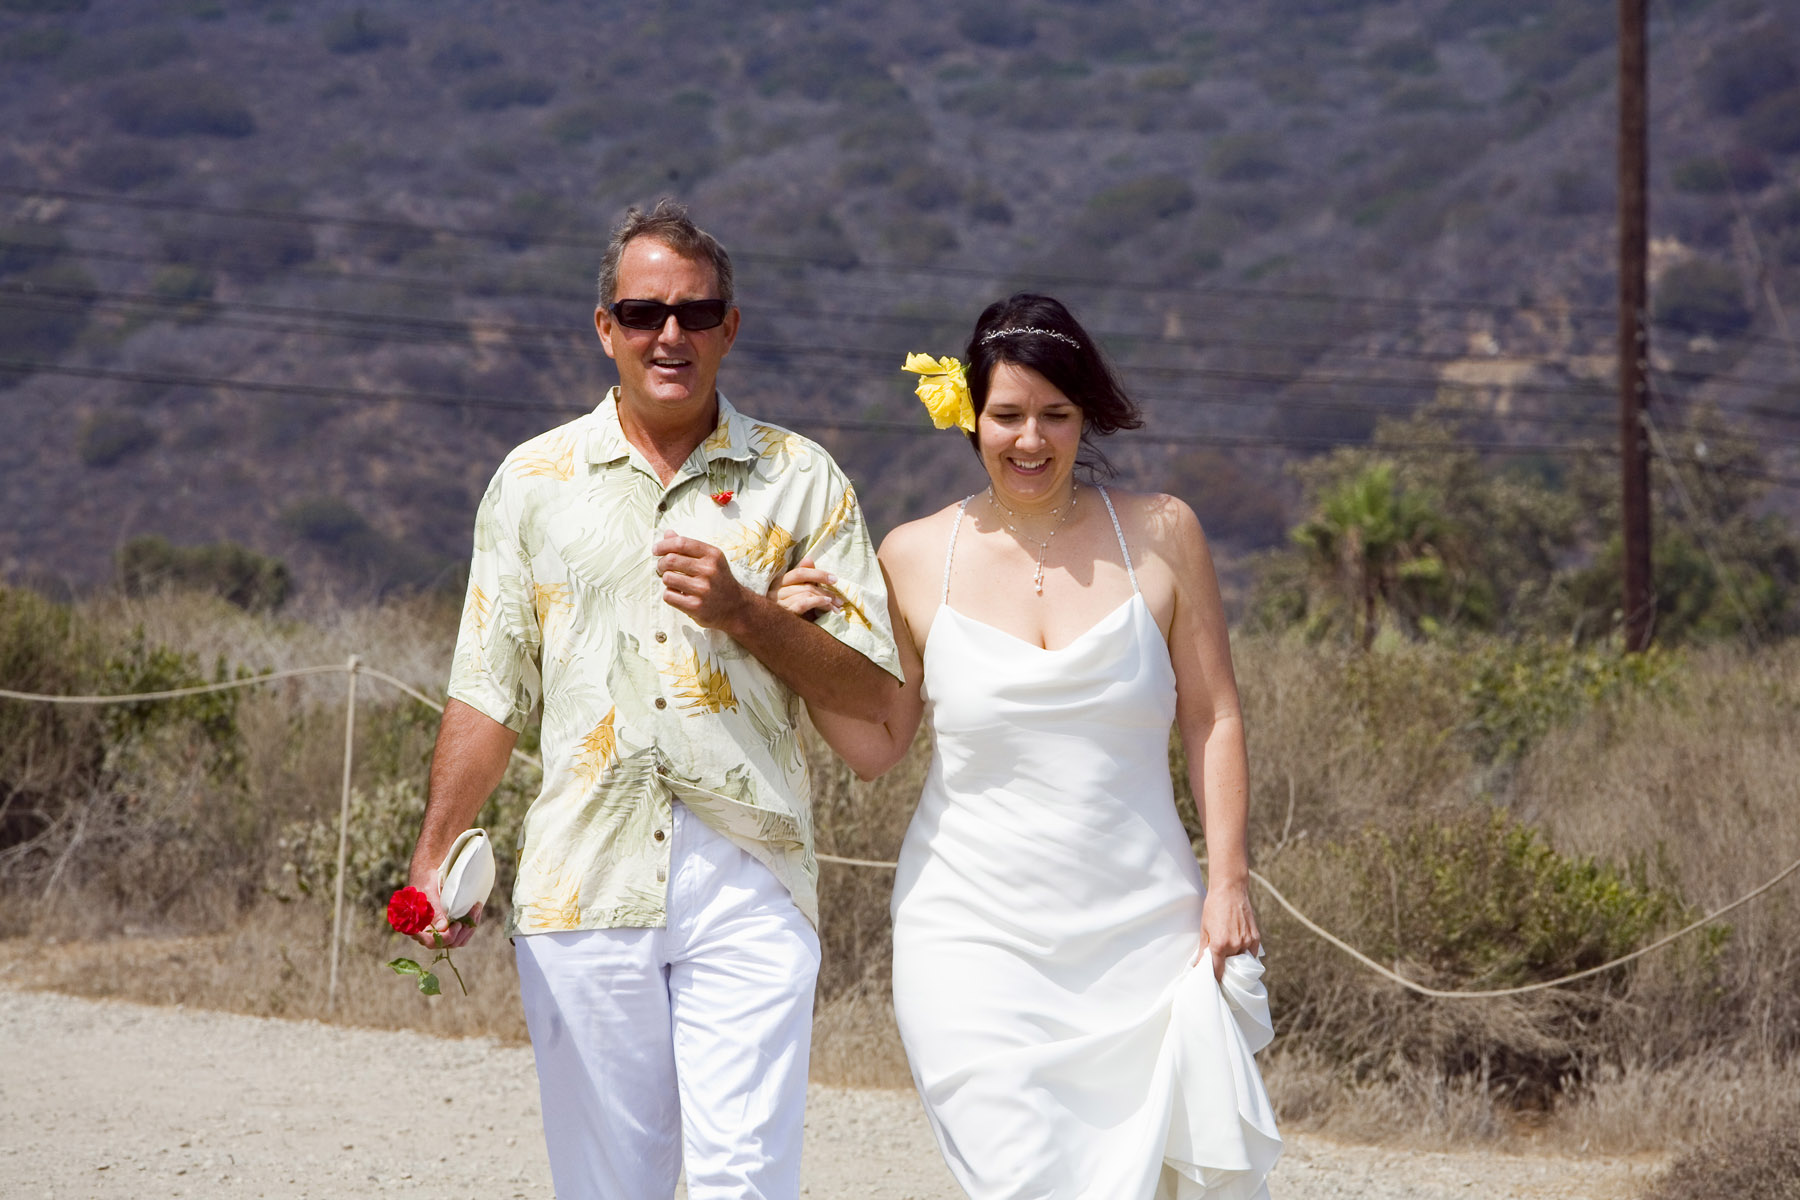 Dennis and Natalie at Leo Carrillo